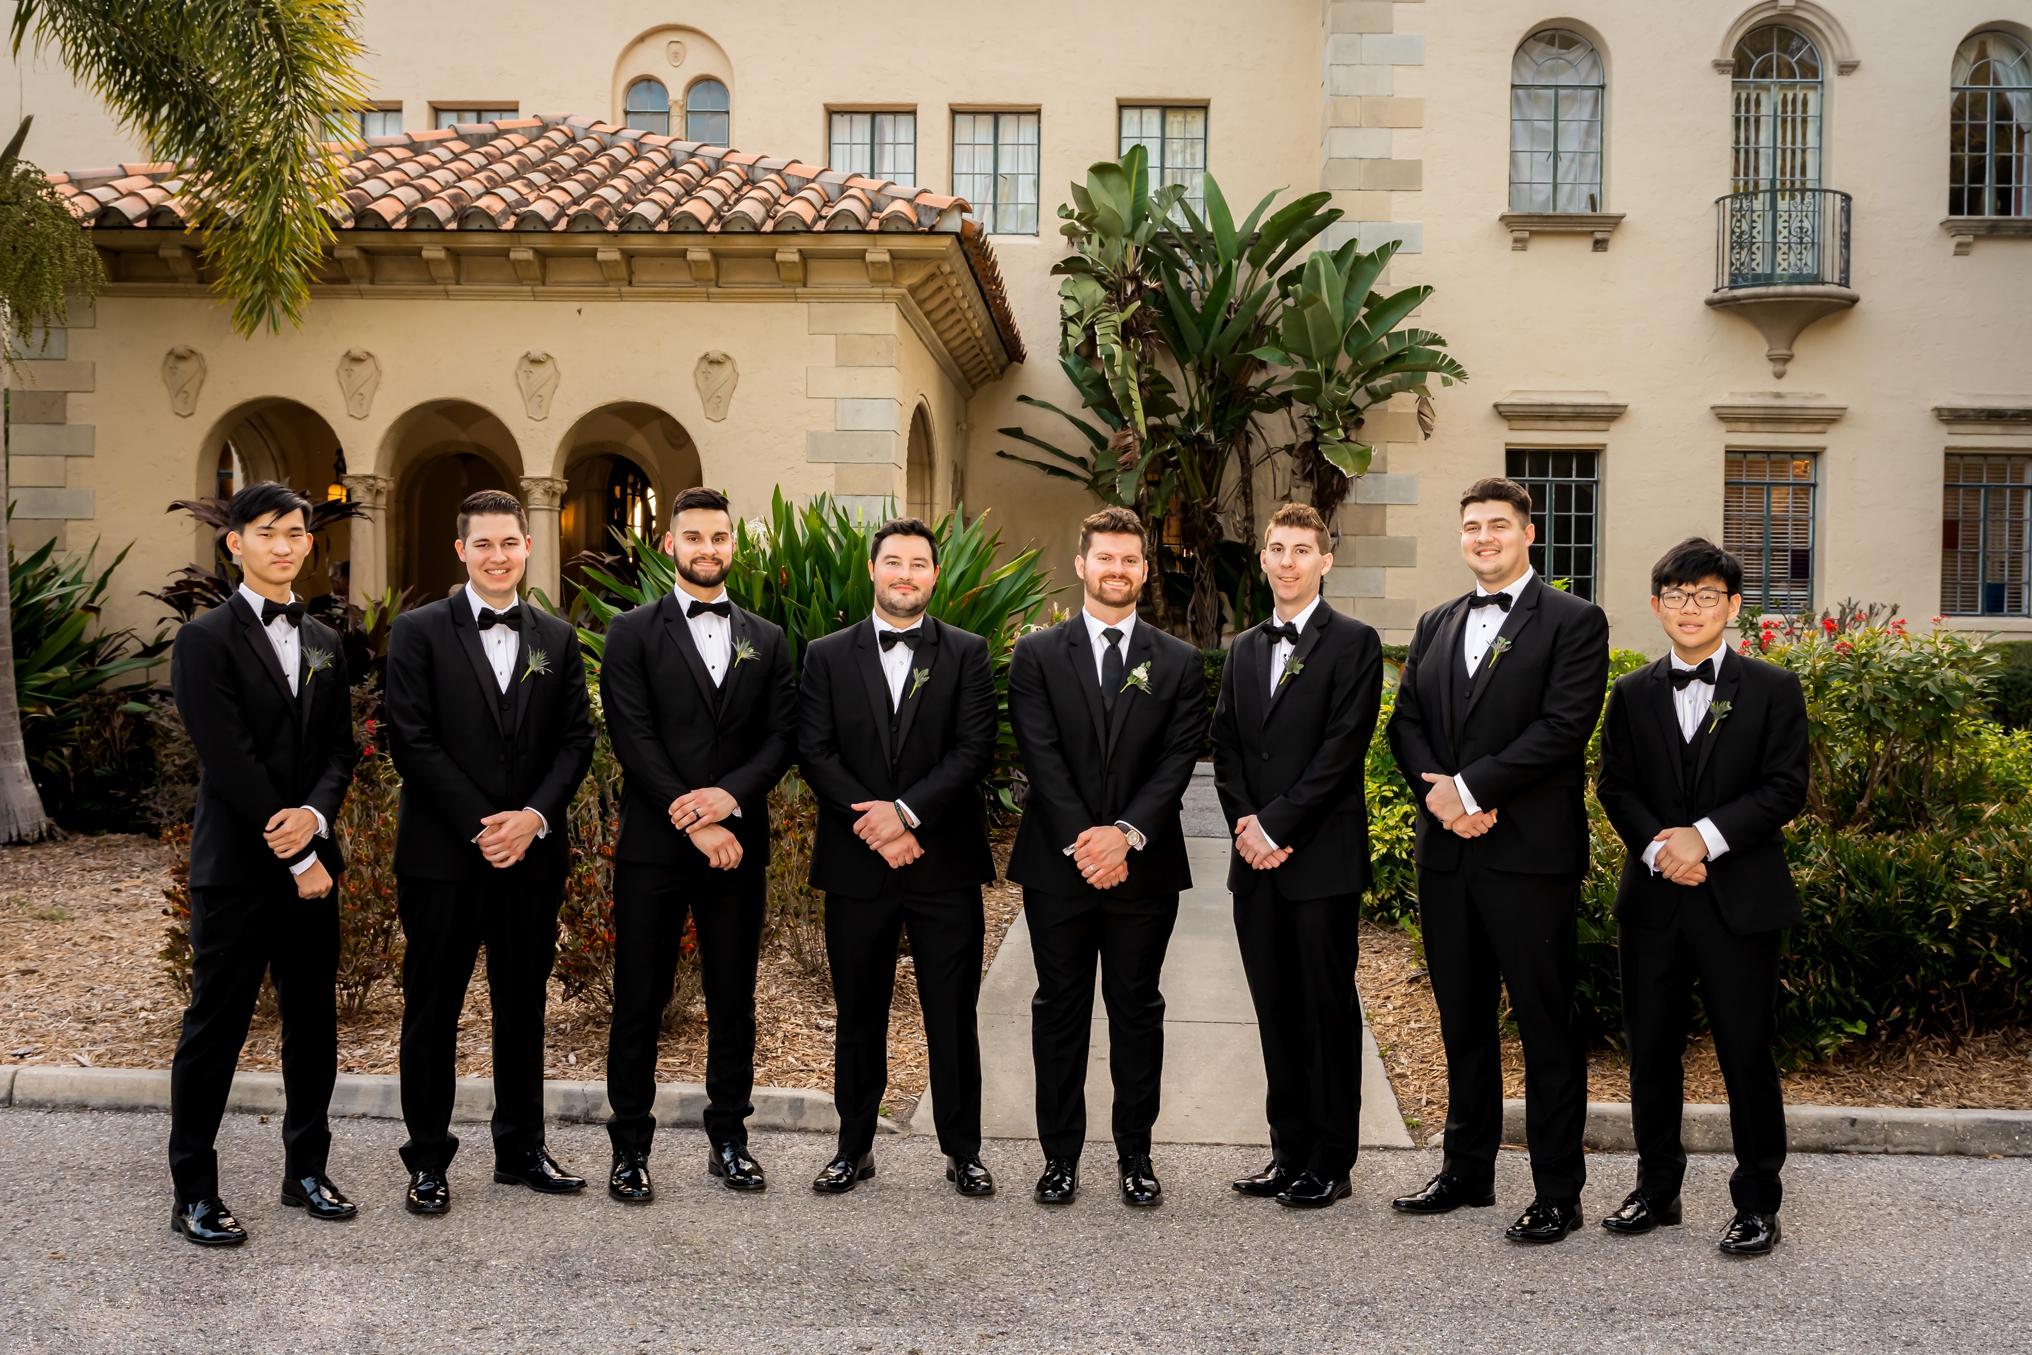 Groom Ethan with his groomsmen out front of the Powel Crosley Estate.